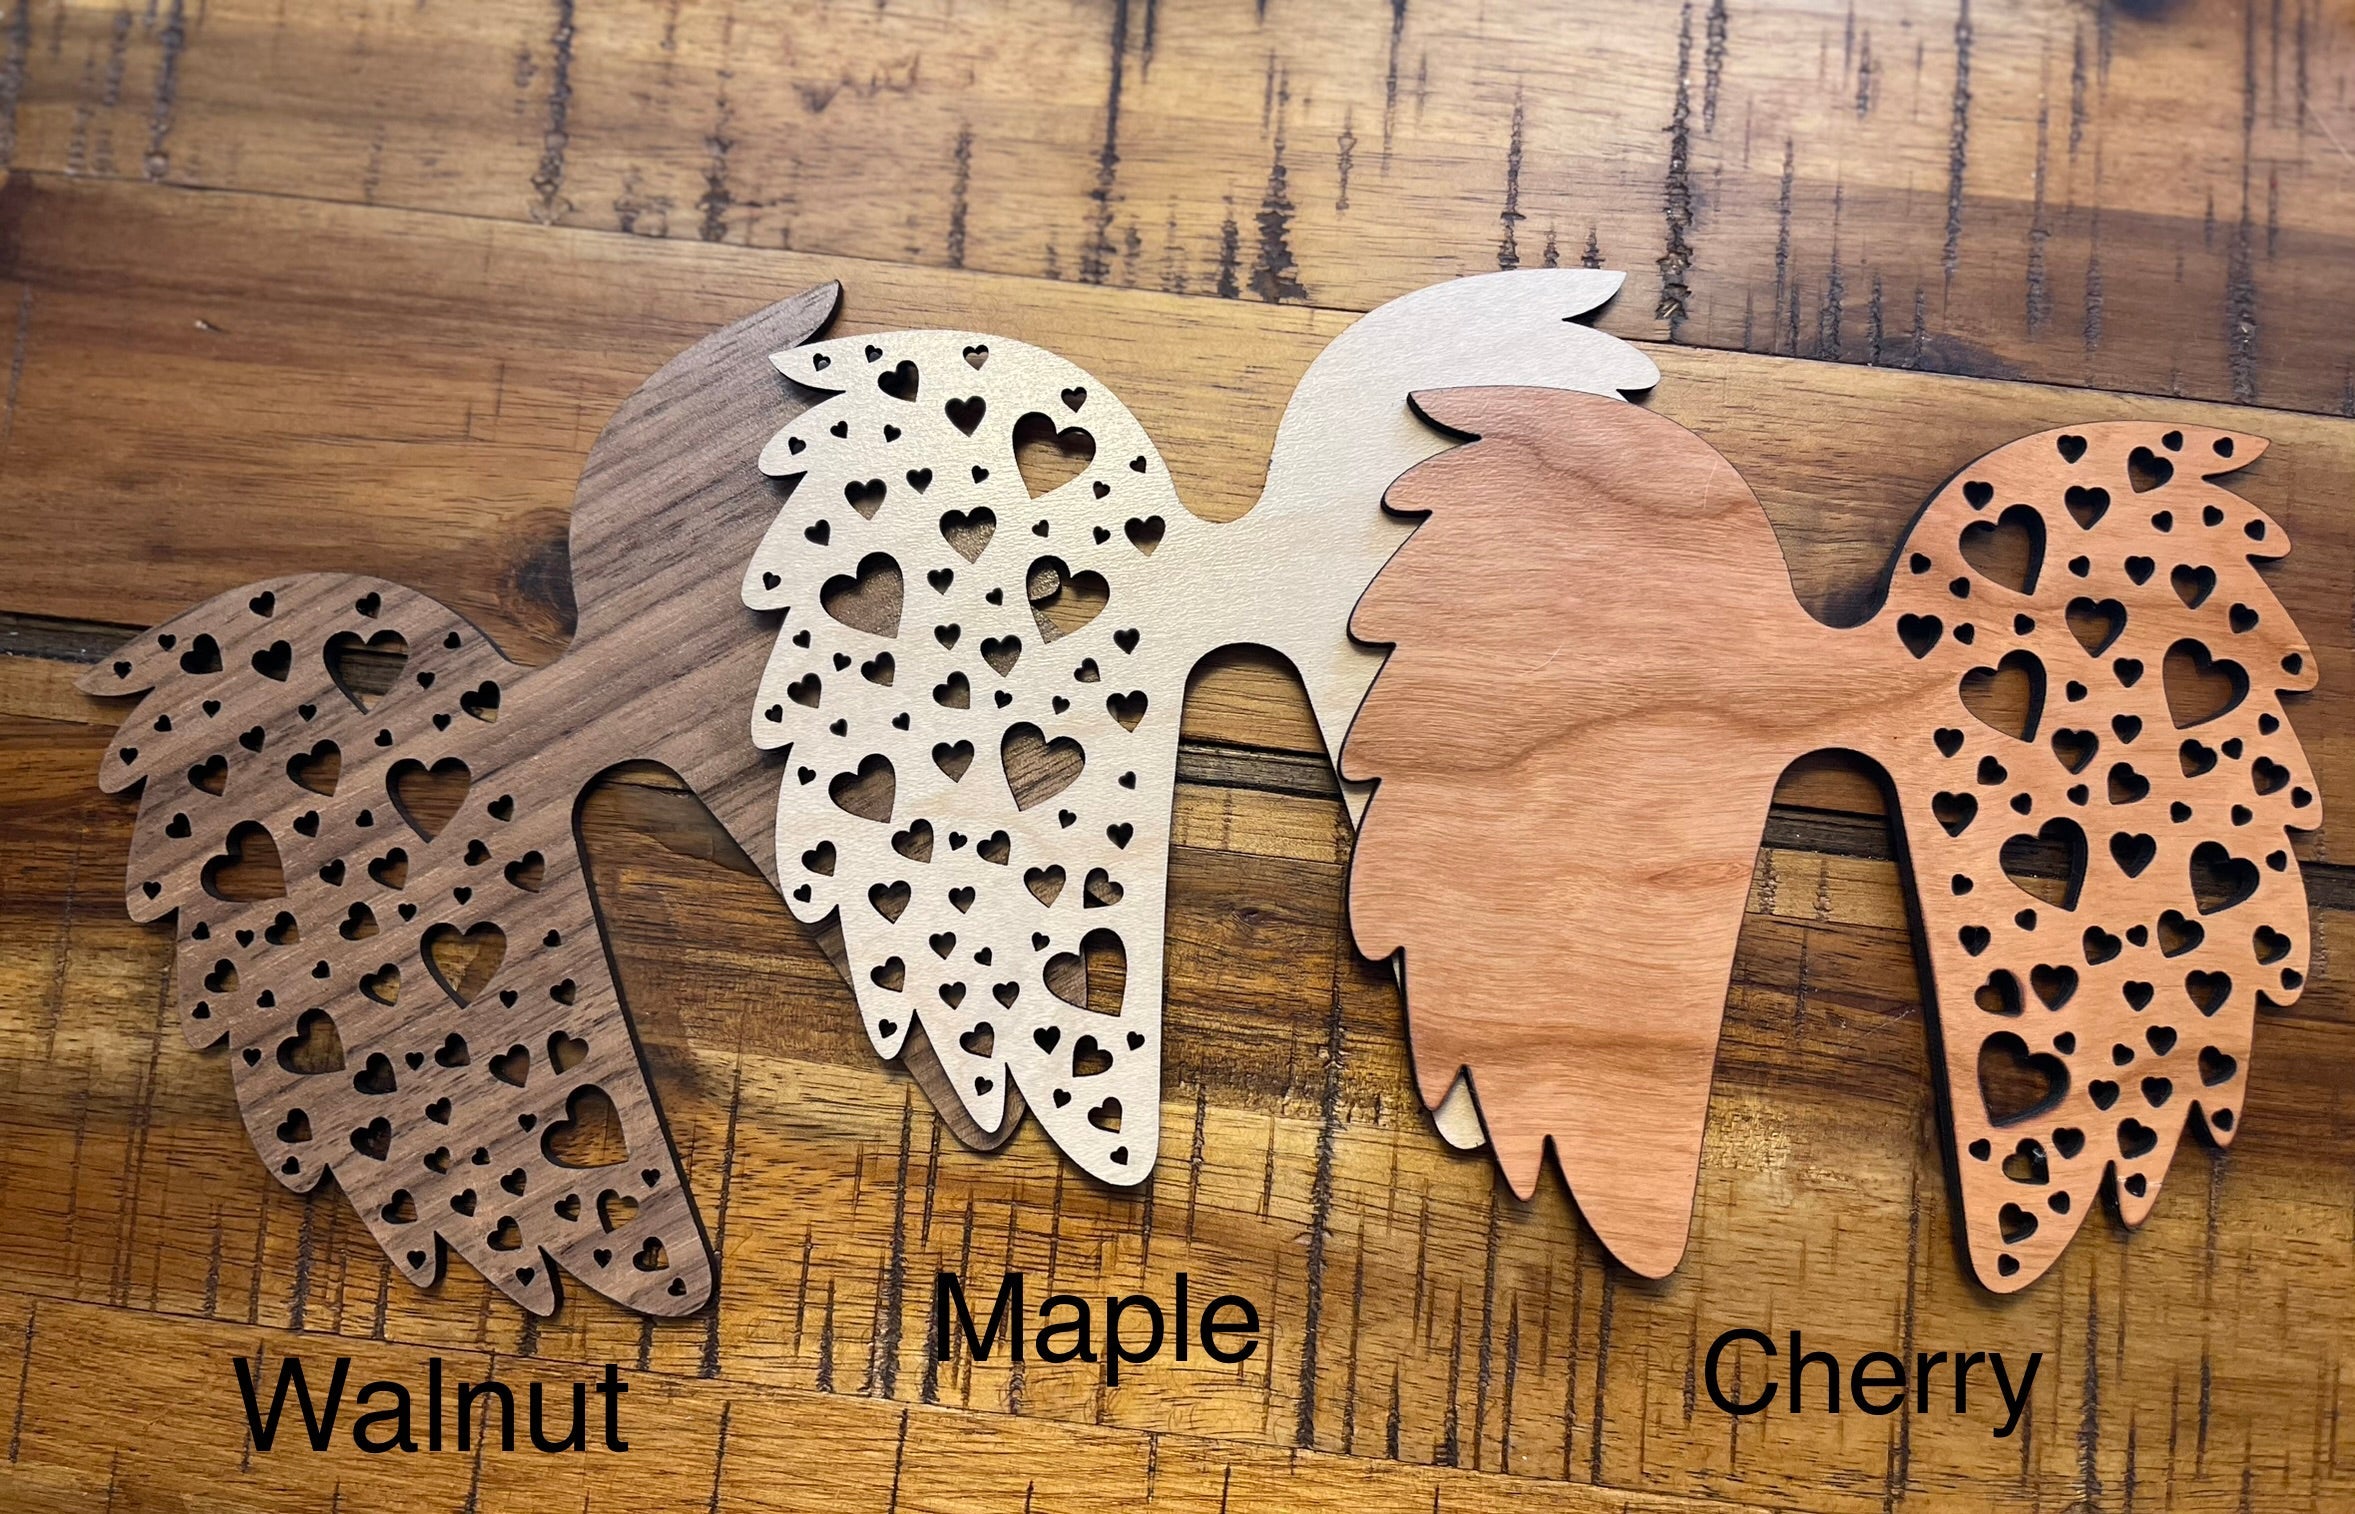 This image shows all three wood colors.  From left to right: Walnut, Maple, and Cherry.